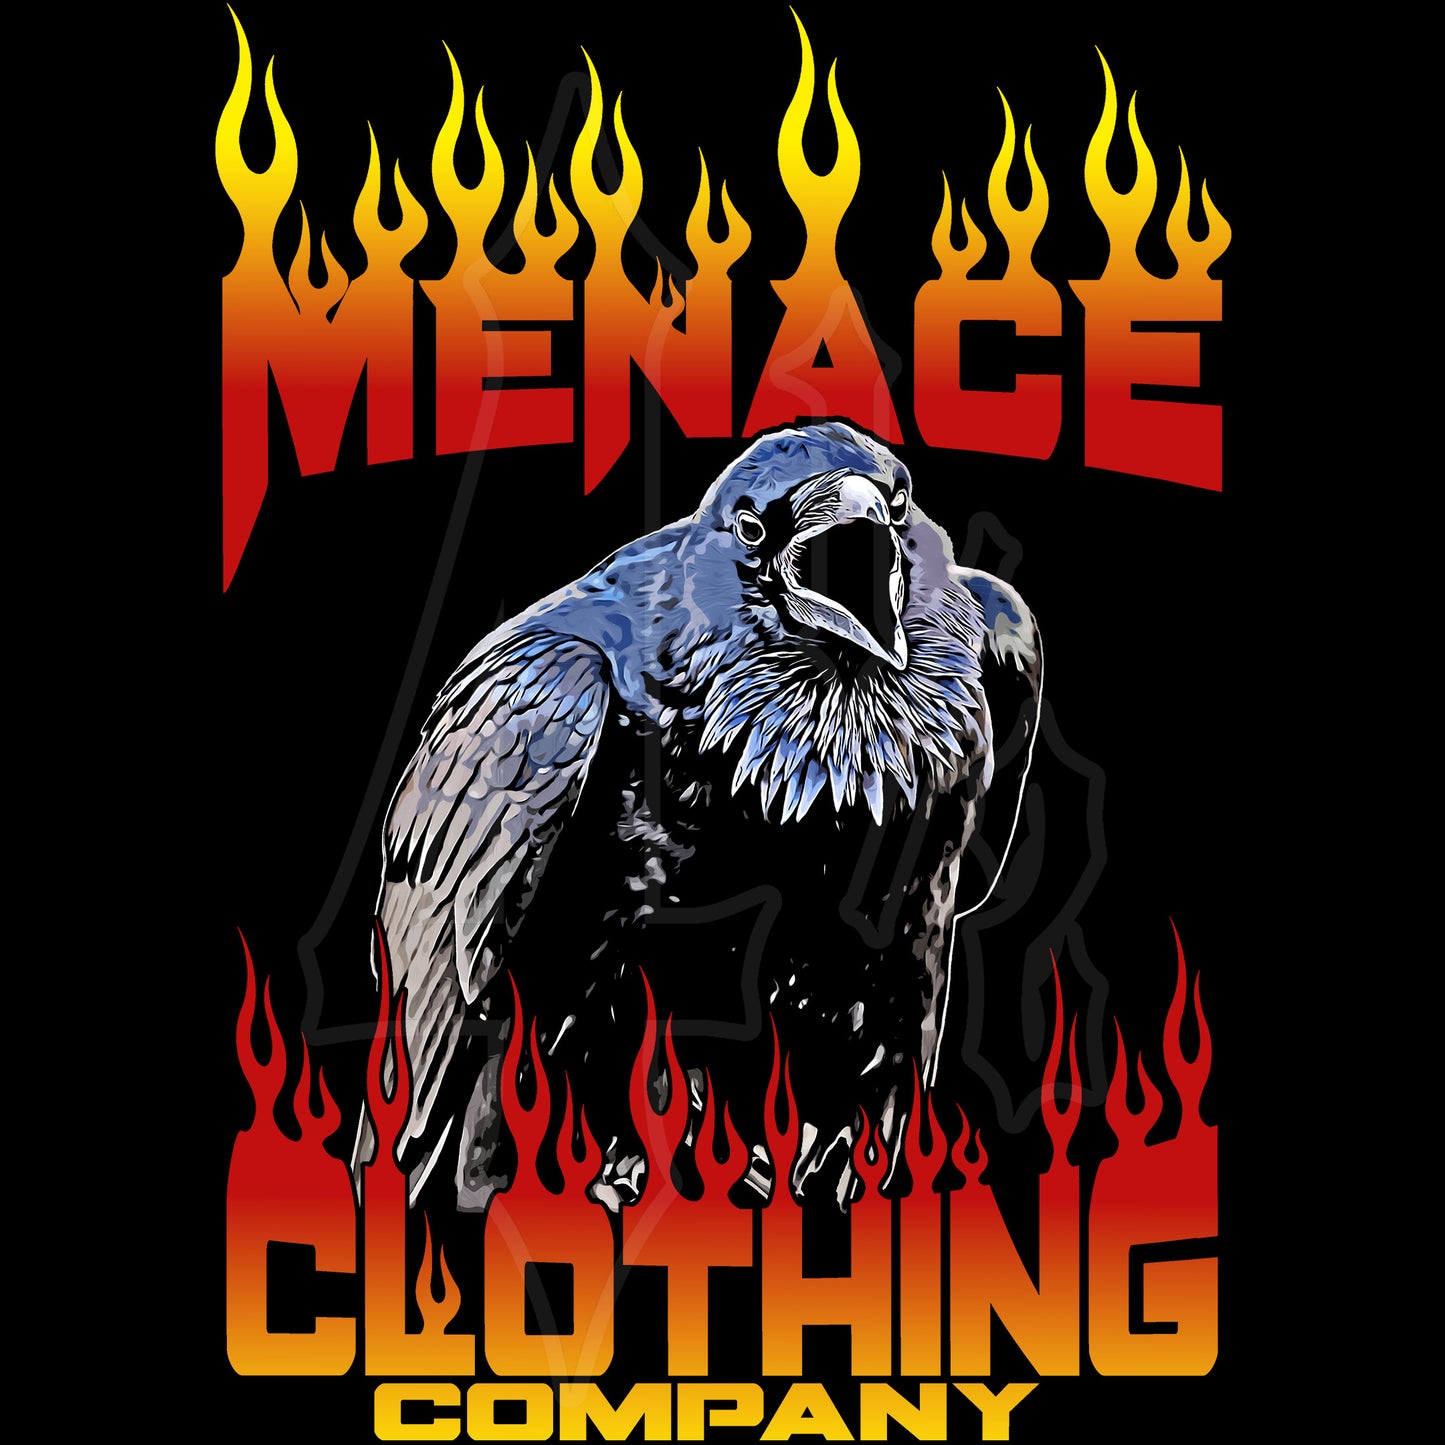 Menace Clothing Crow graphic. Colorful crow with Menace Clothing Company written in flames.